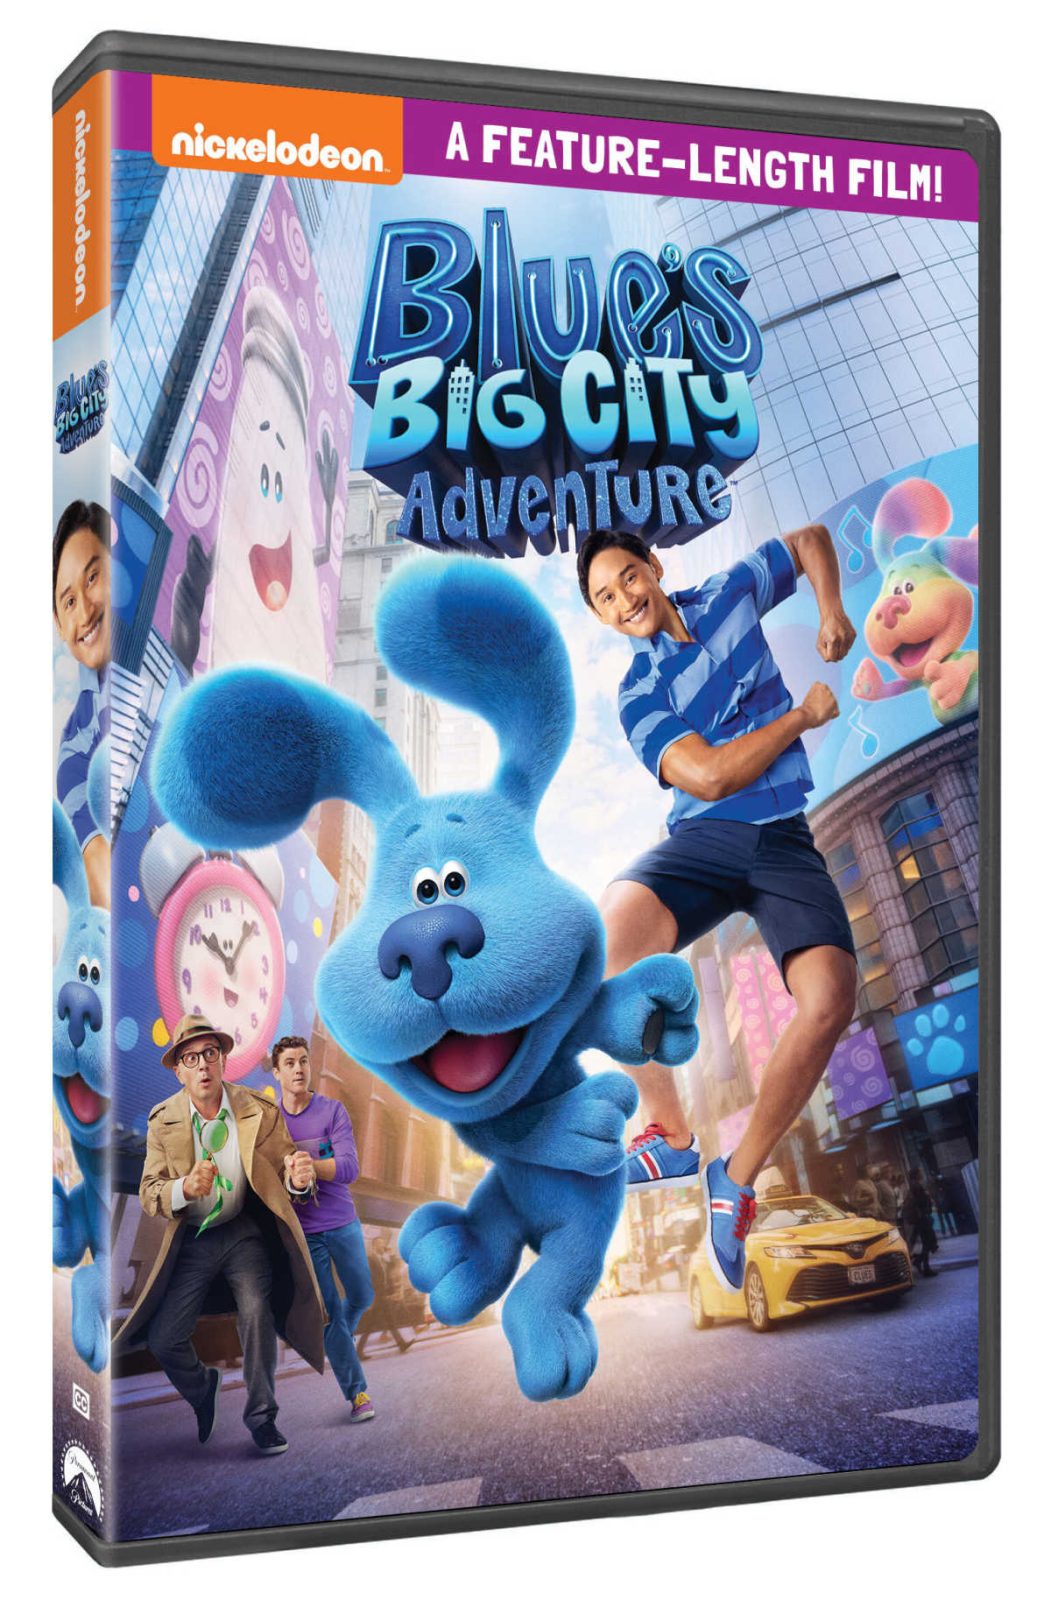 It's time for a one of a kind Blue's Big City Adventure, when Blue heads to New York City in the new family friendly adventure movie. 